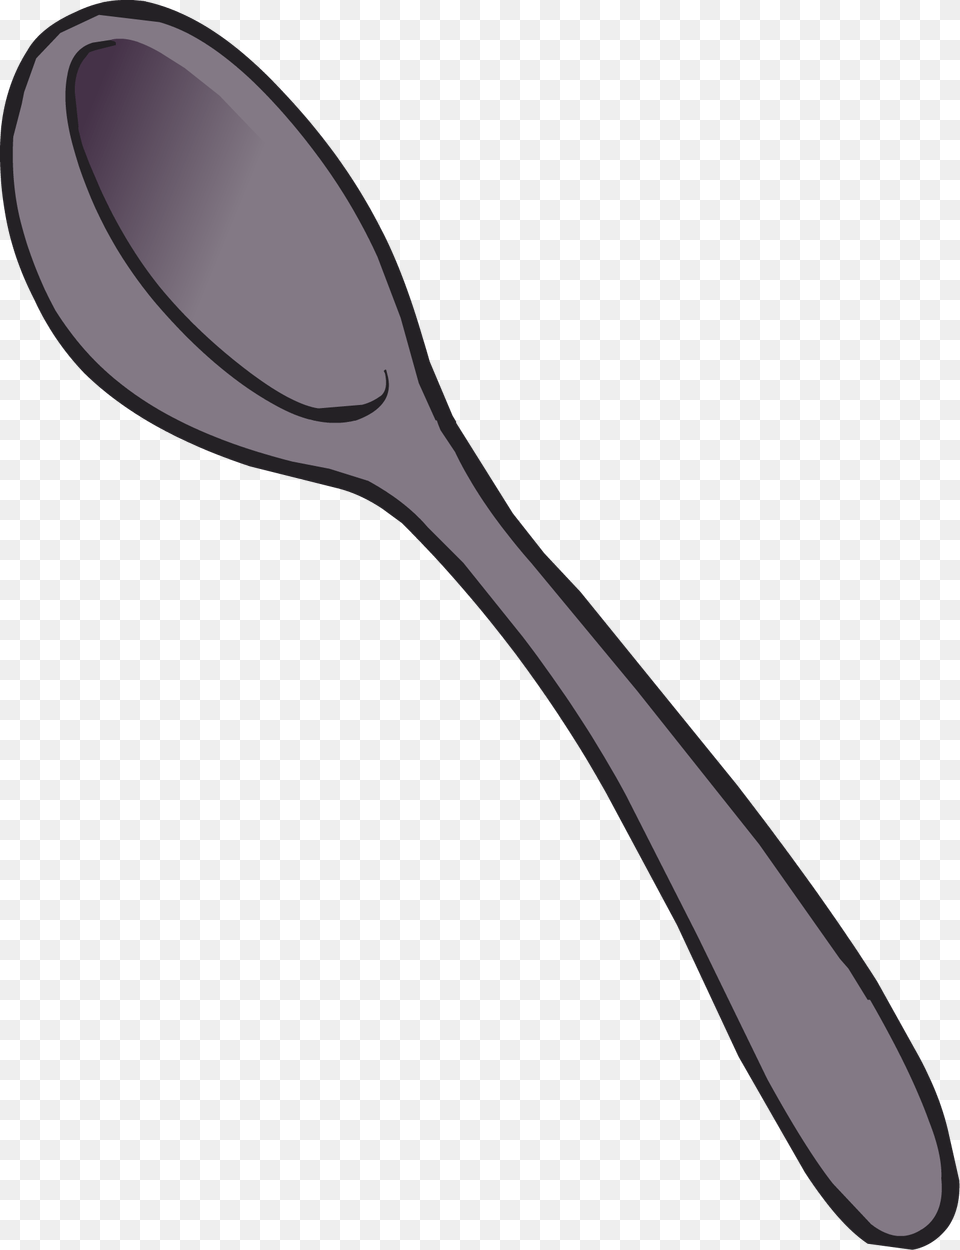 My Spoon Icon Club Penguin Spoon, Cutlery, Blade, Dagger, Knife Free Png Download